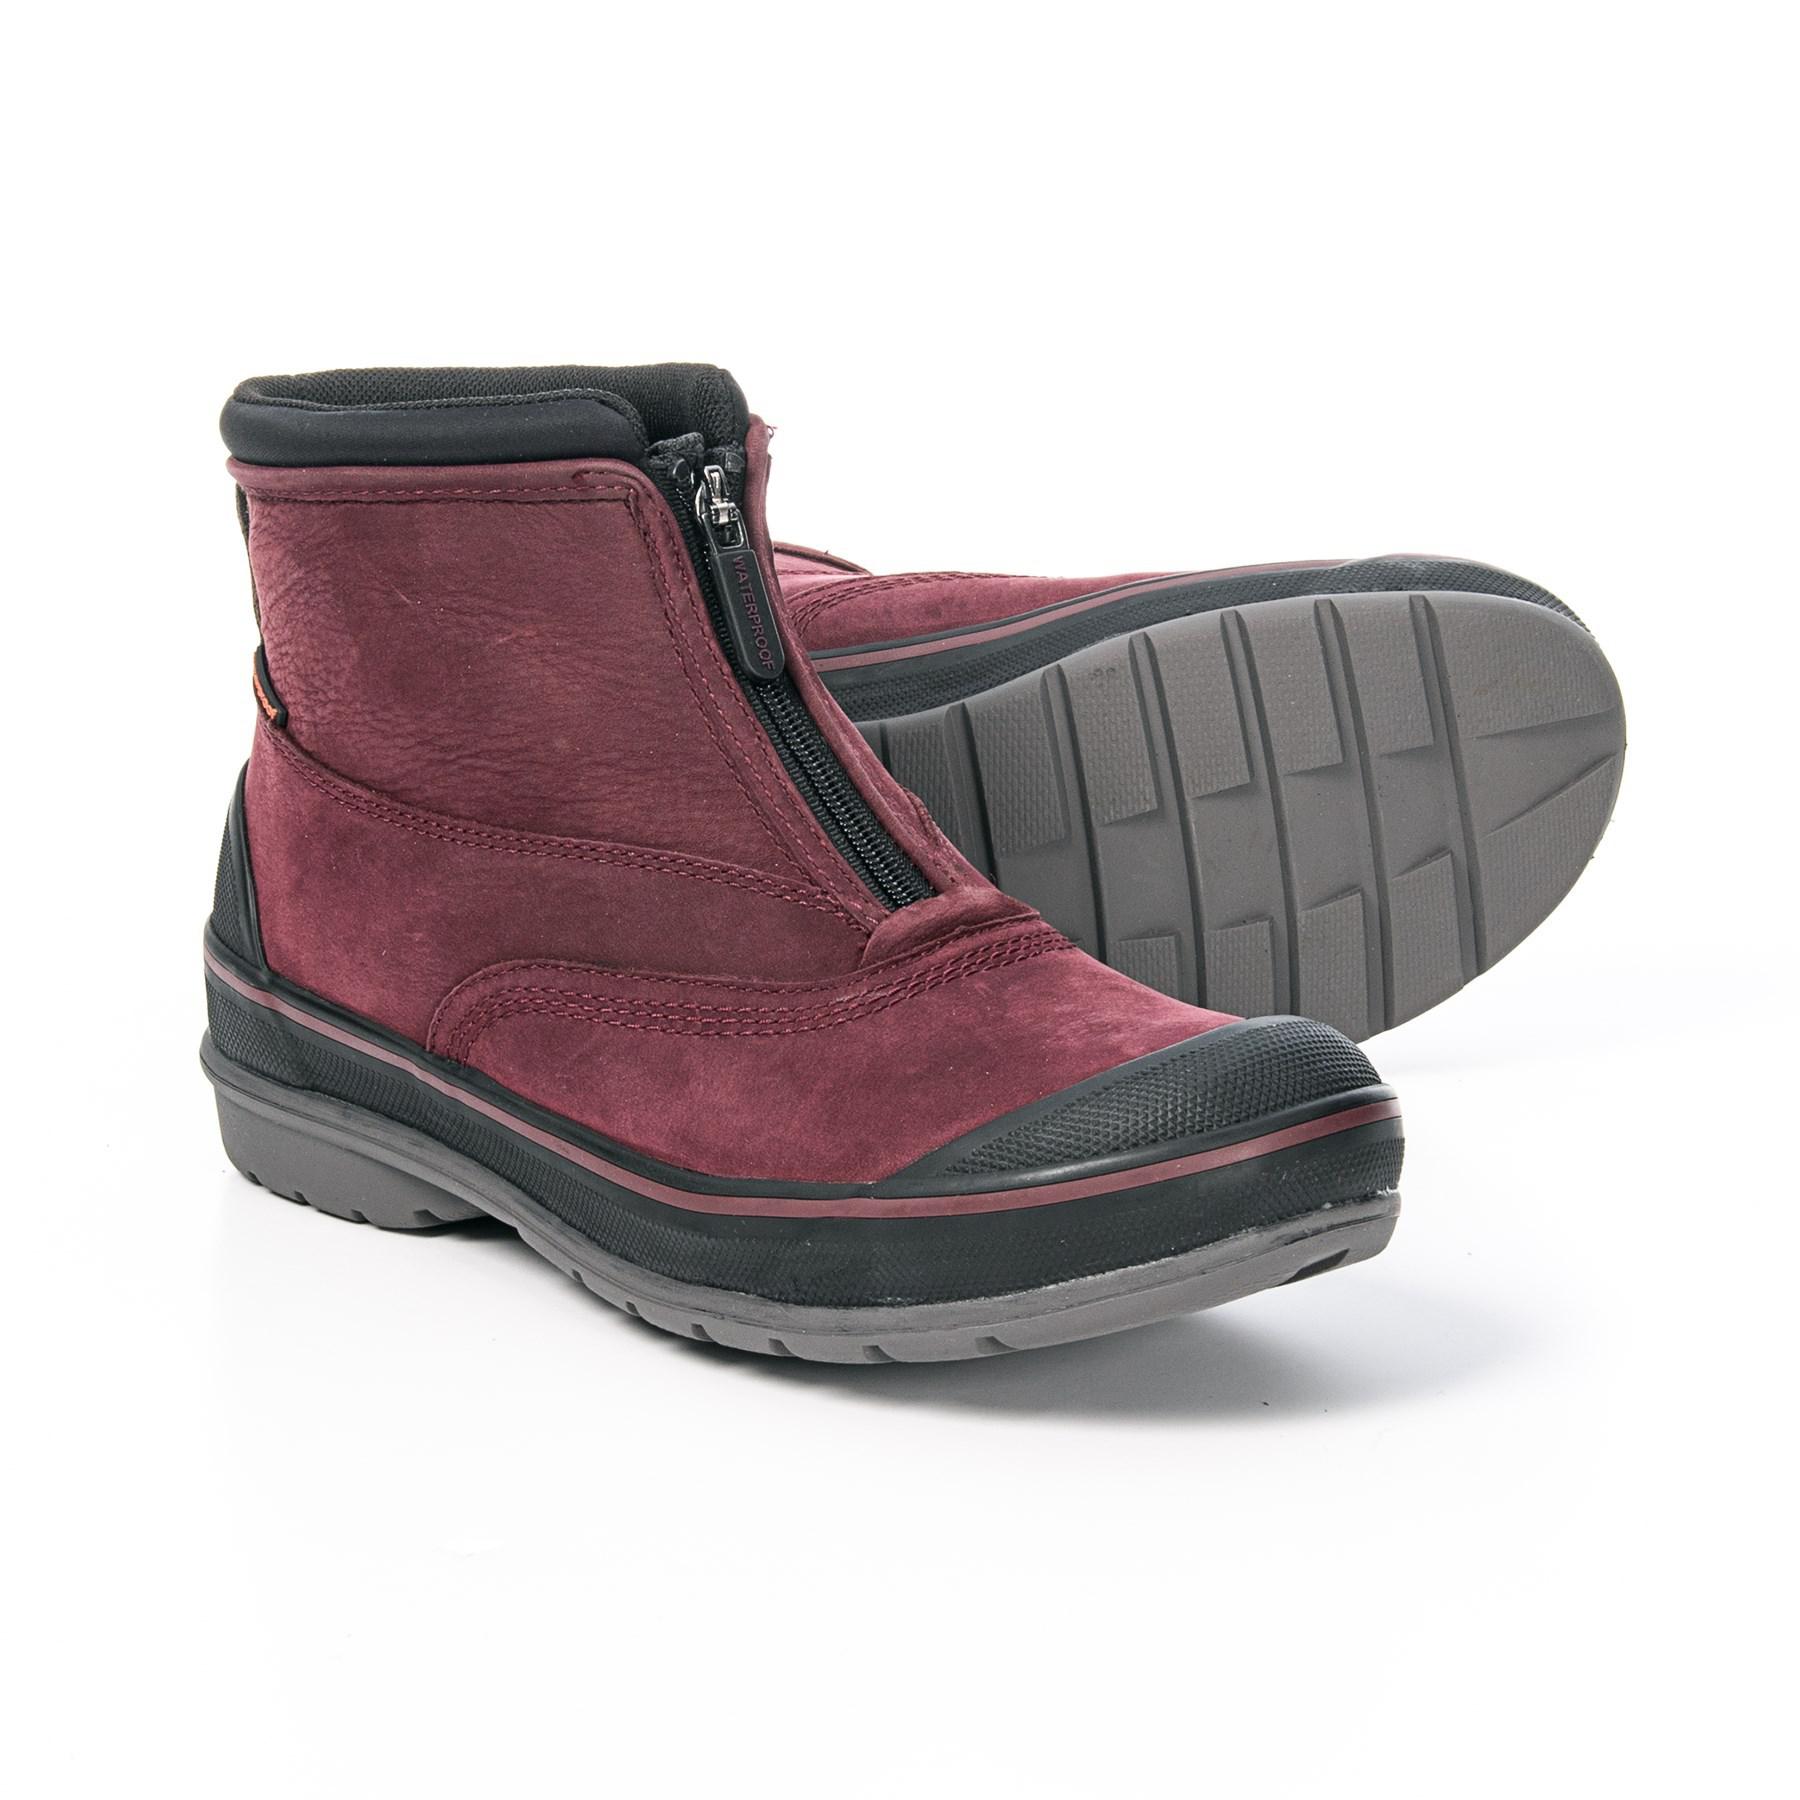 clarks muckers hike winter boots